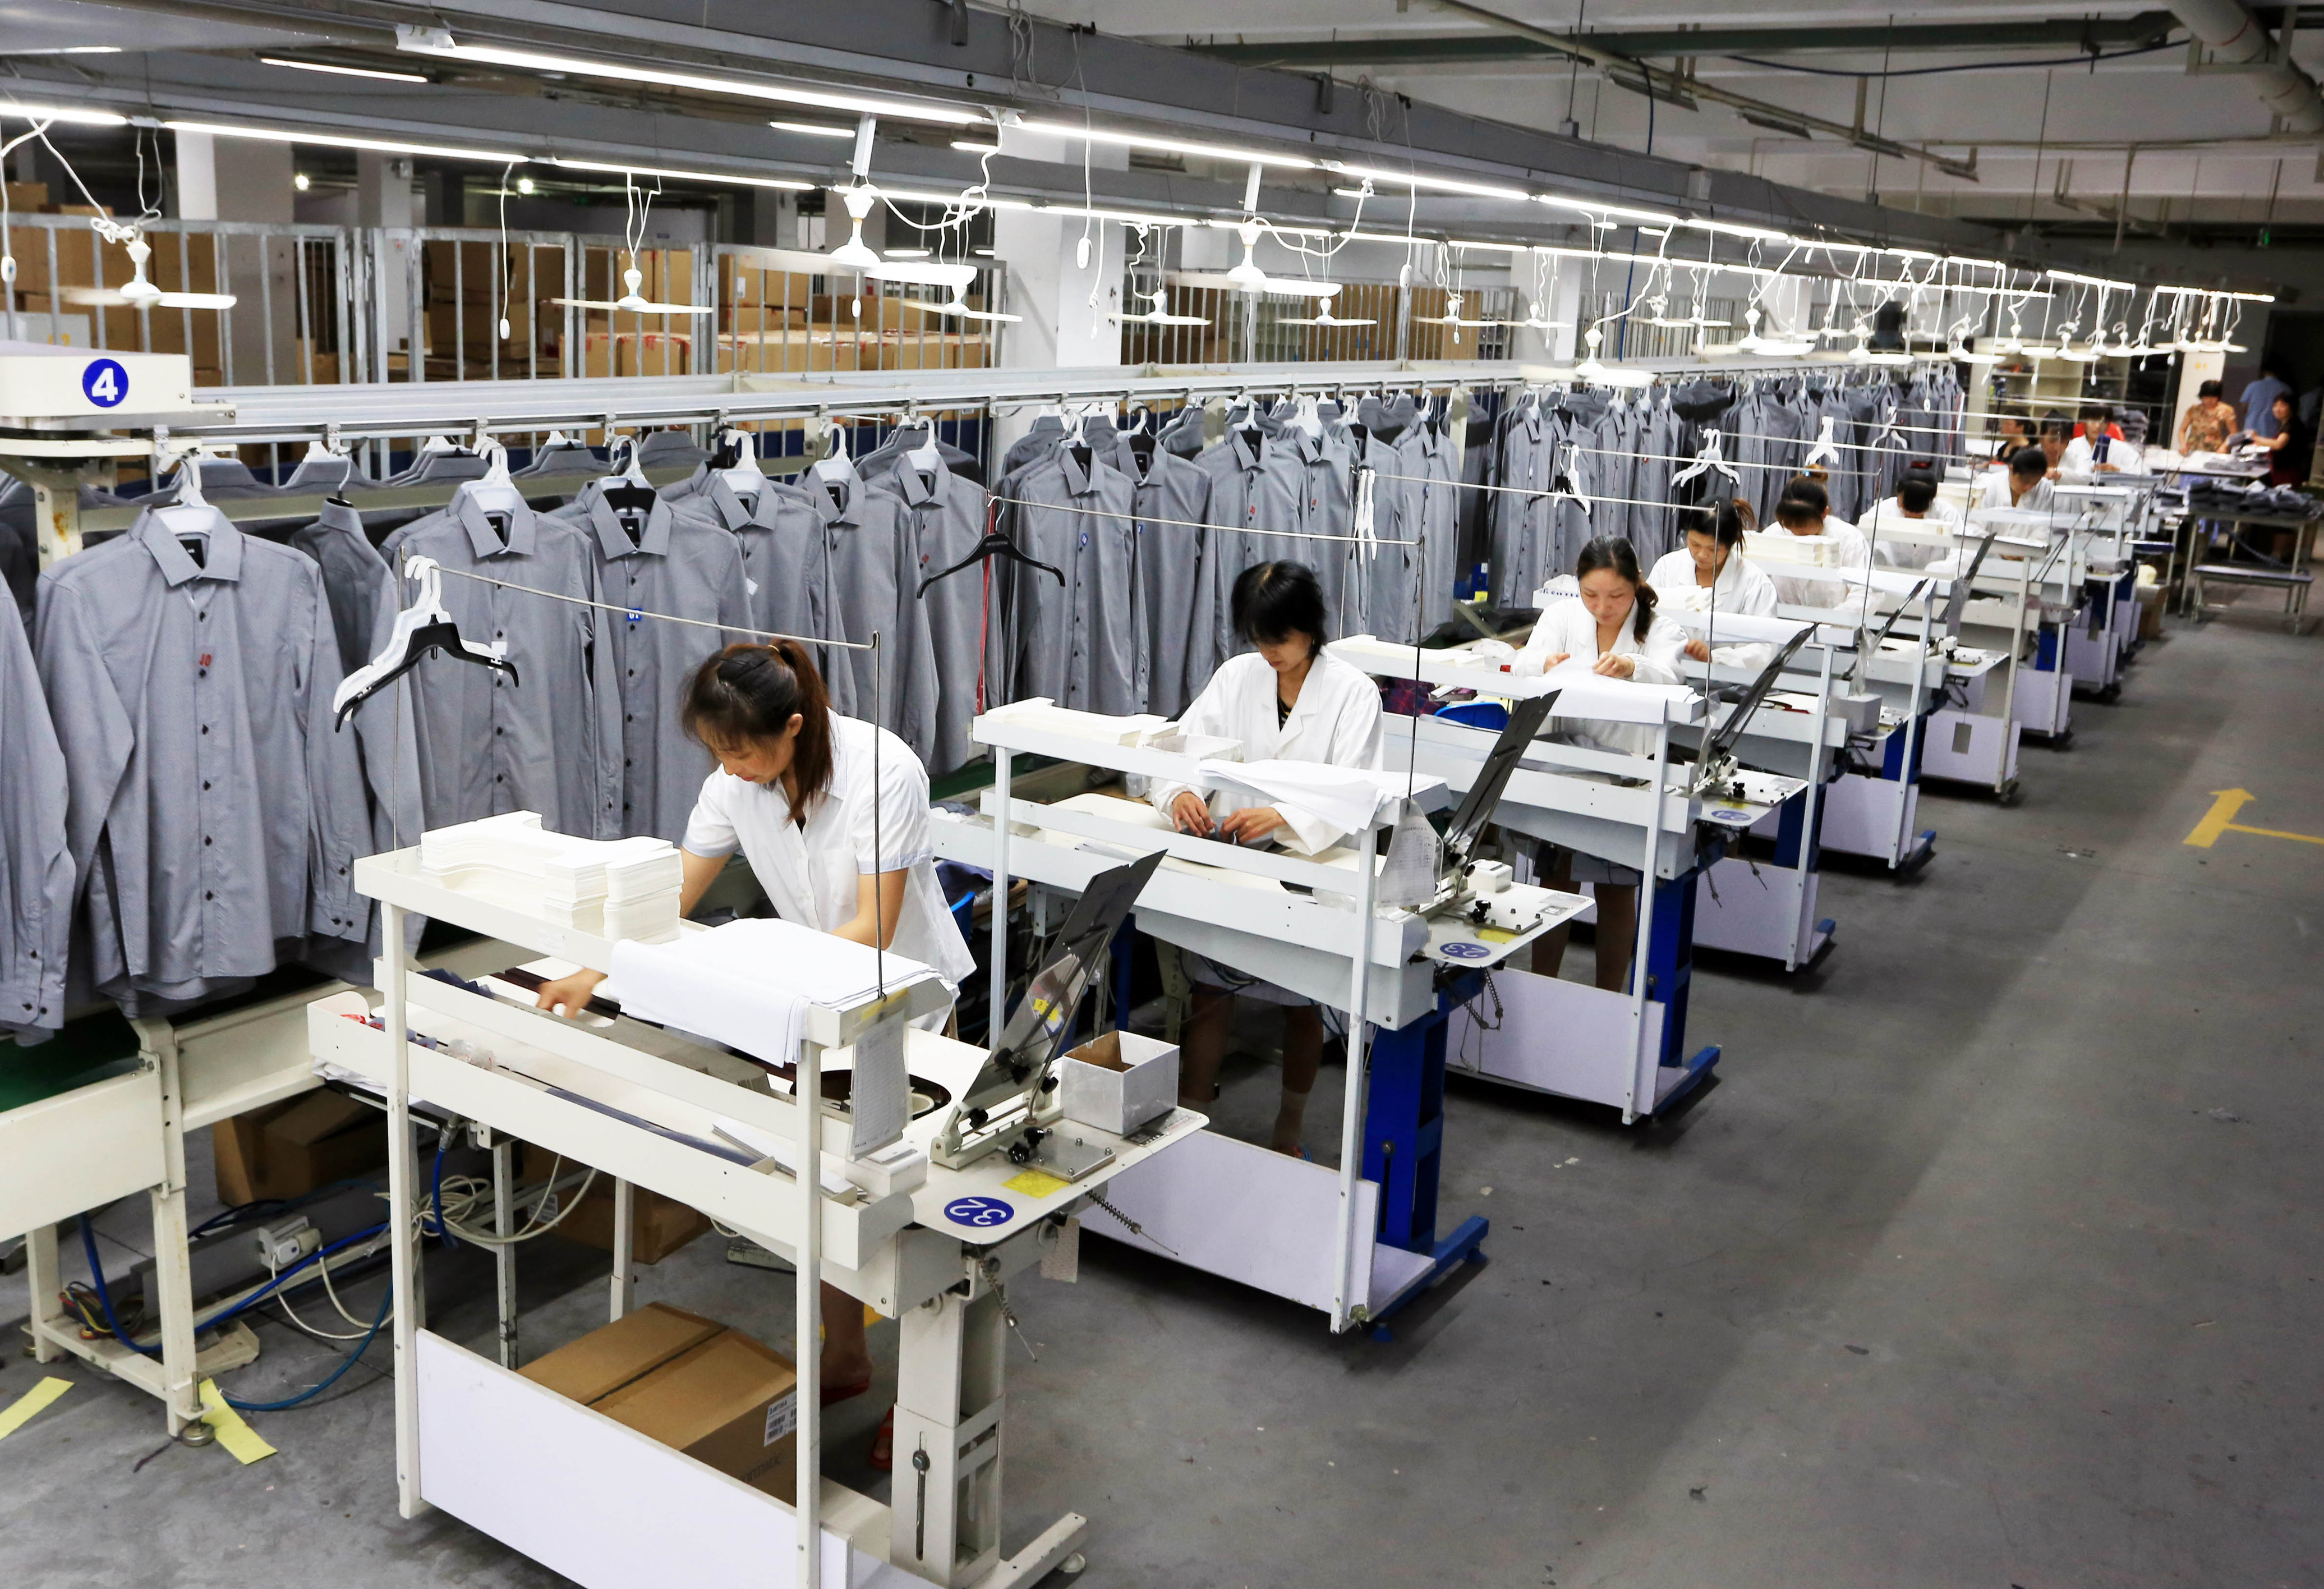 This photo taken on August 29, 2016 shows Chinese workers making shirts at a spinnery in Nantong, east China's Jiangsu province. G20 leaders will meet in China this weekend in a climate of economic uncertainty and sluggish albeit relatively steady growth -- but the absence of an urgent crisis means the forum will be short on breakthroughs, analysts say. / AFP PHOTO / STR / China OUT